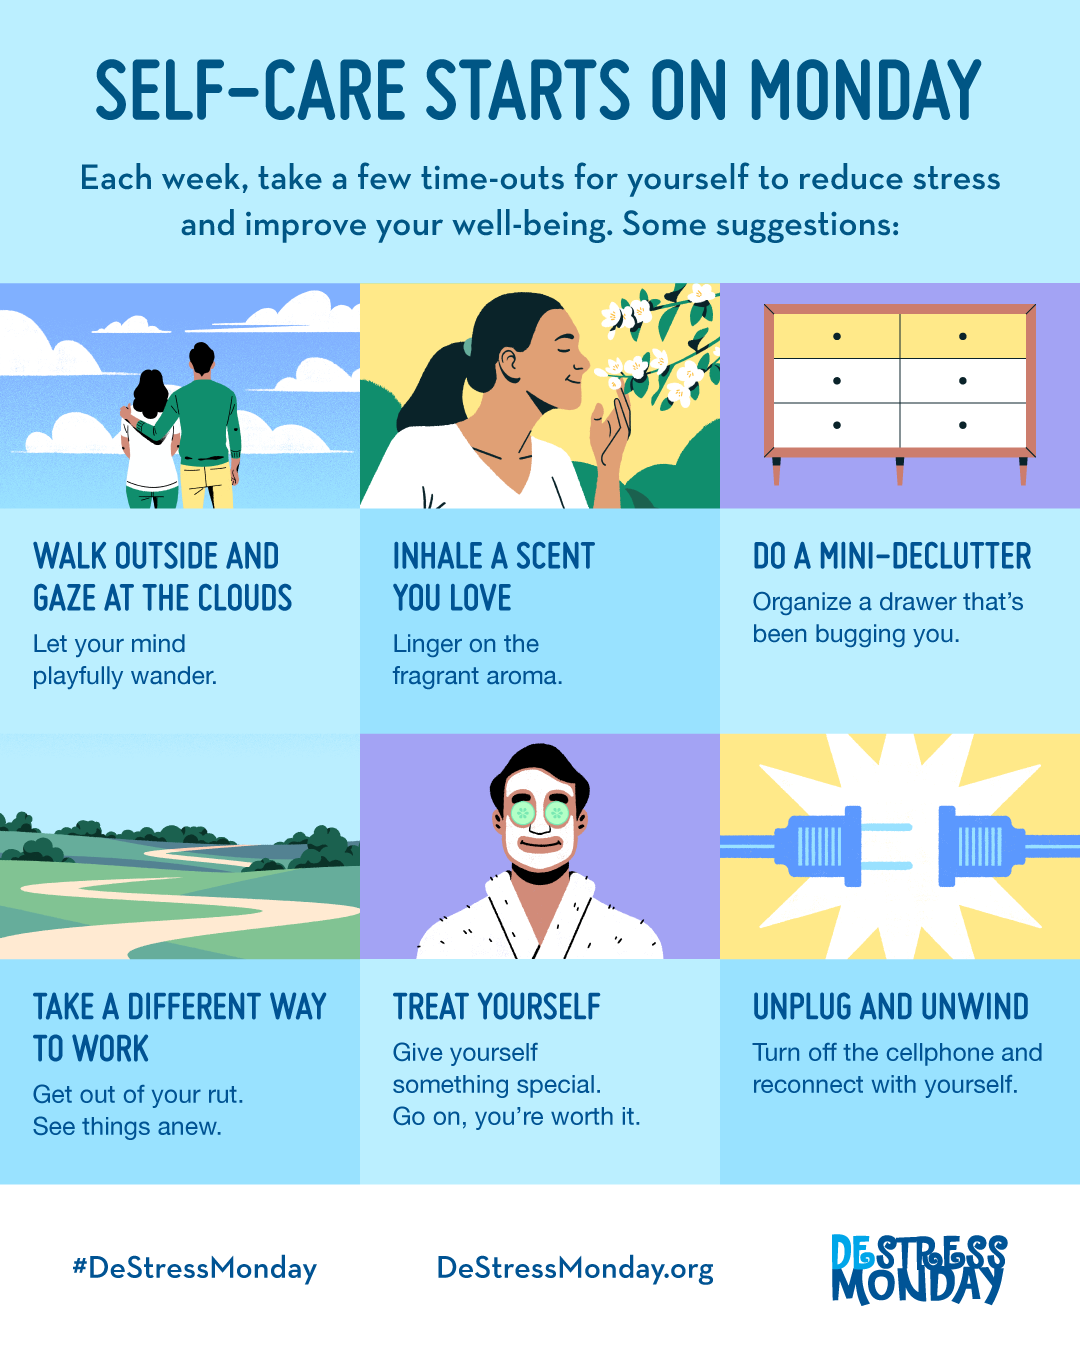 Self-care starts on Monday. Each week, take a few time-outs for yourself to reduce stress and improve your well-being.